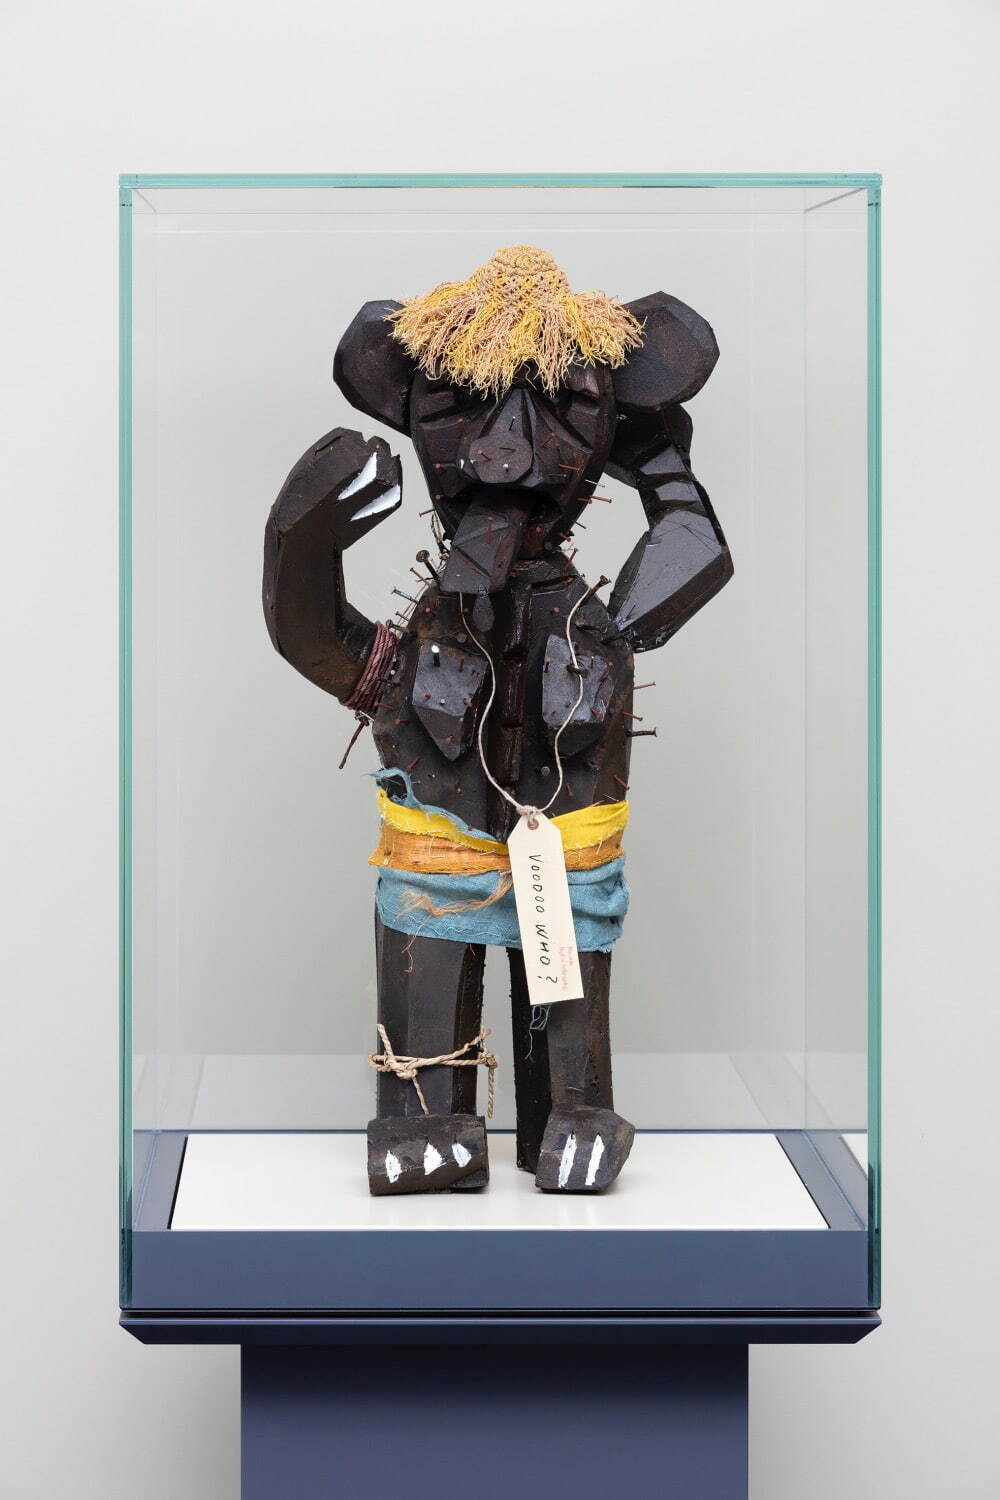 Simon Fujiwara, <i width="1000" height="1500">Vodoo Who? (from the collection of Humboldt Who))</i>, 2021
Styrofoam, nails, paint, fabric
170×50×50cm (vitrine, overall)
Photo: Andrea Rosetti